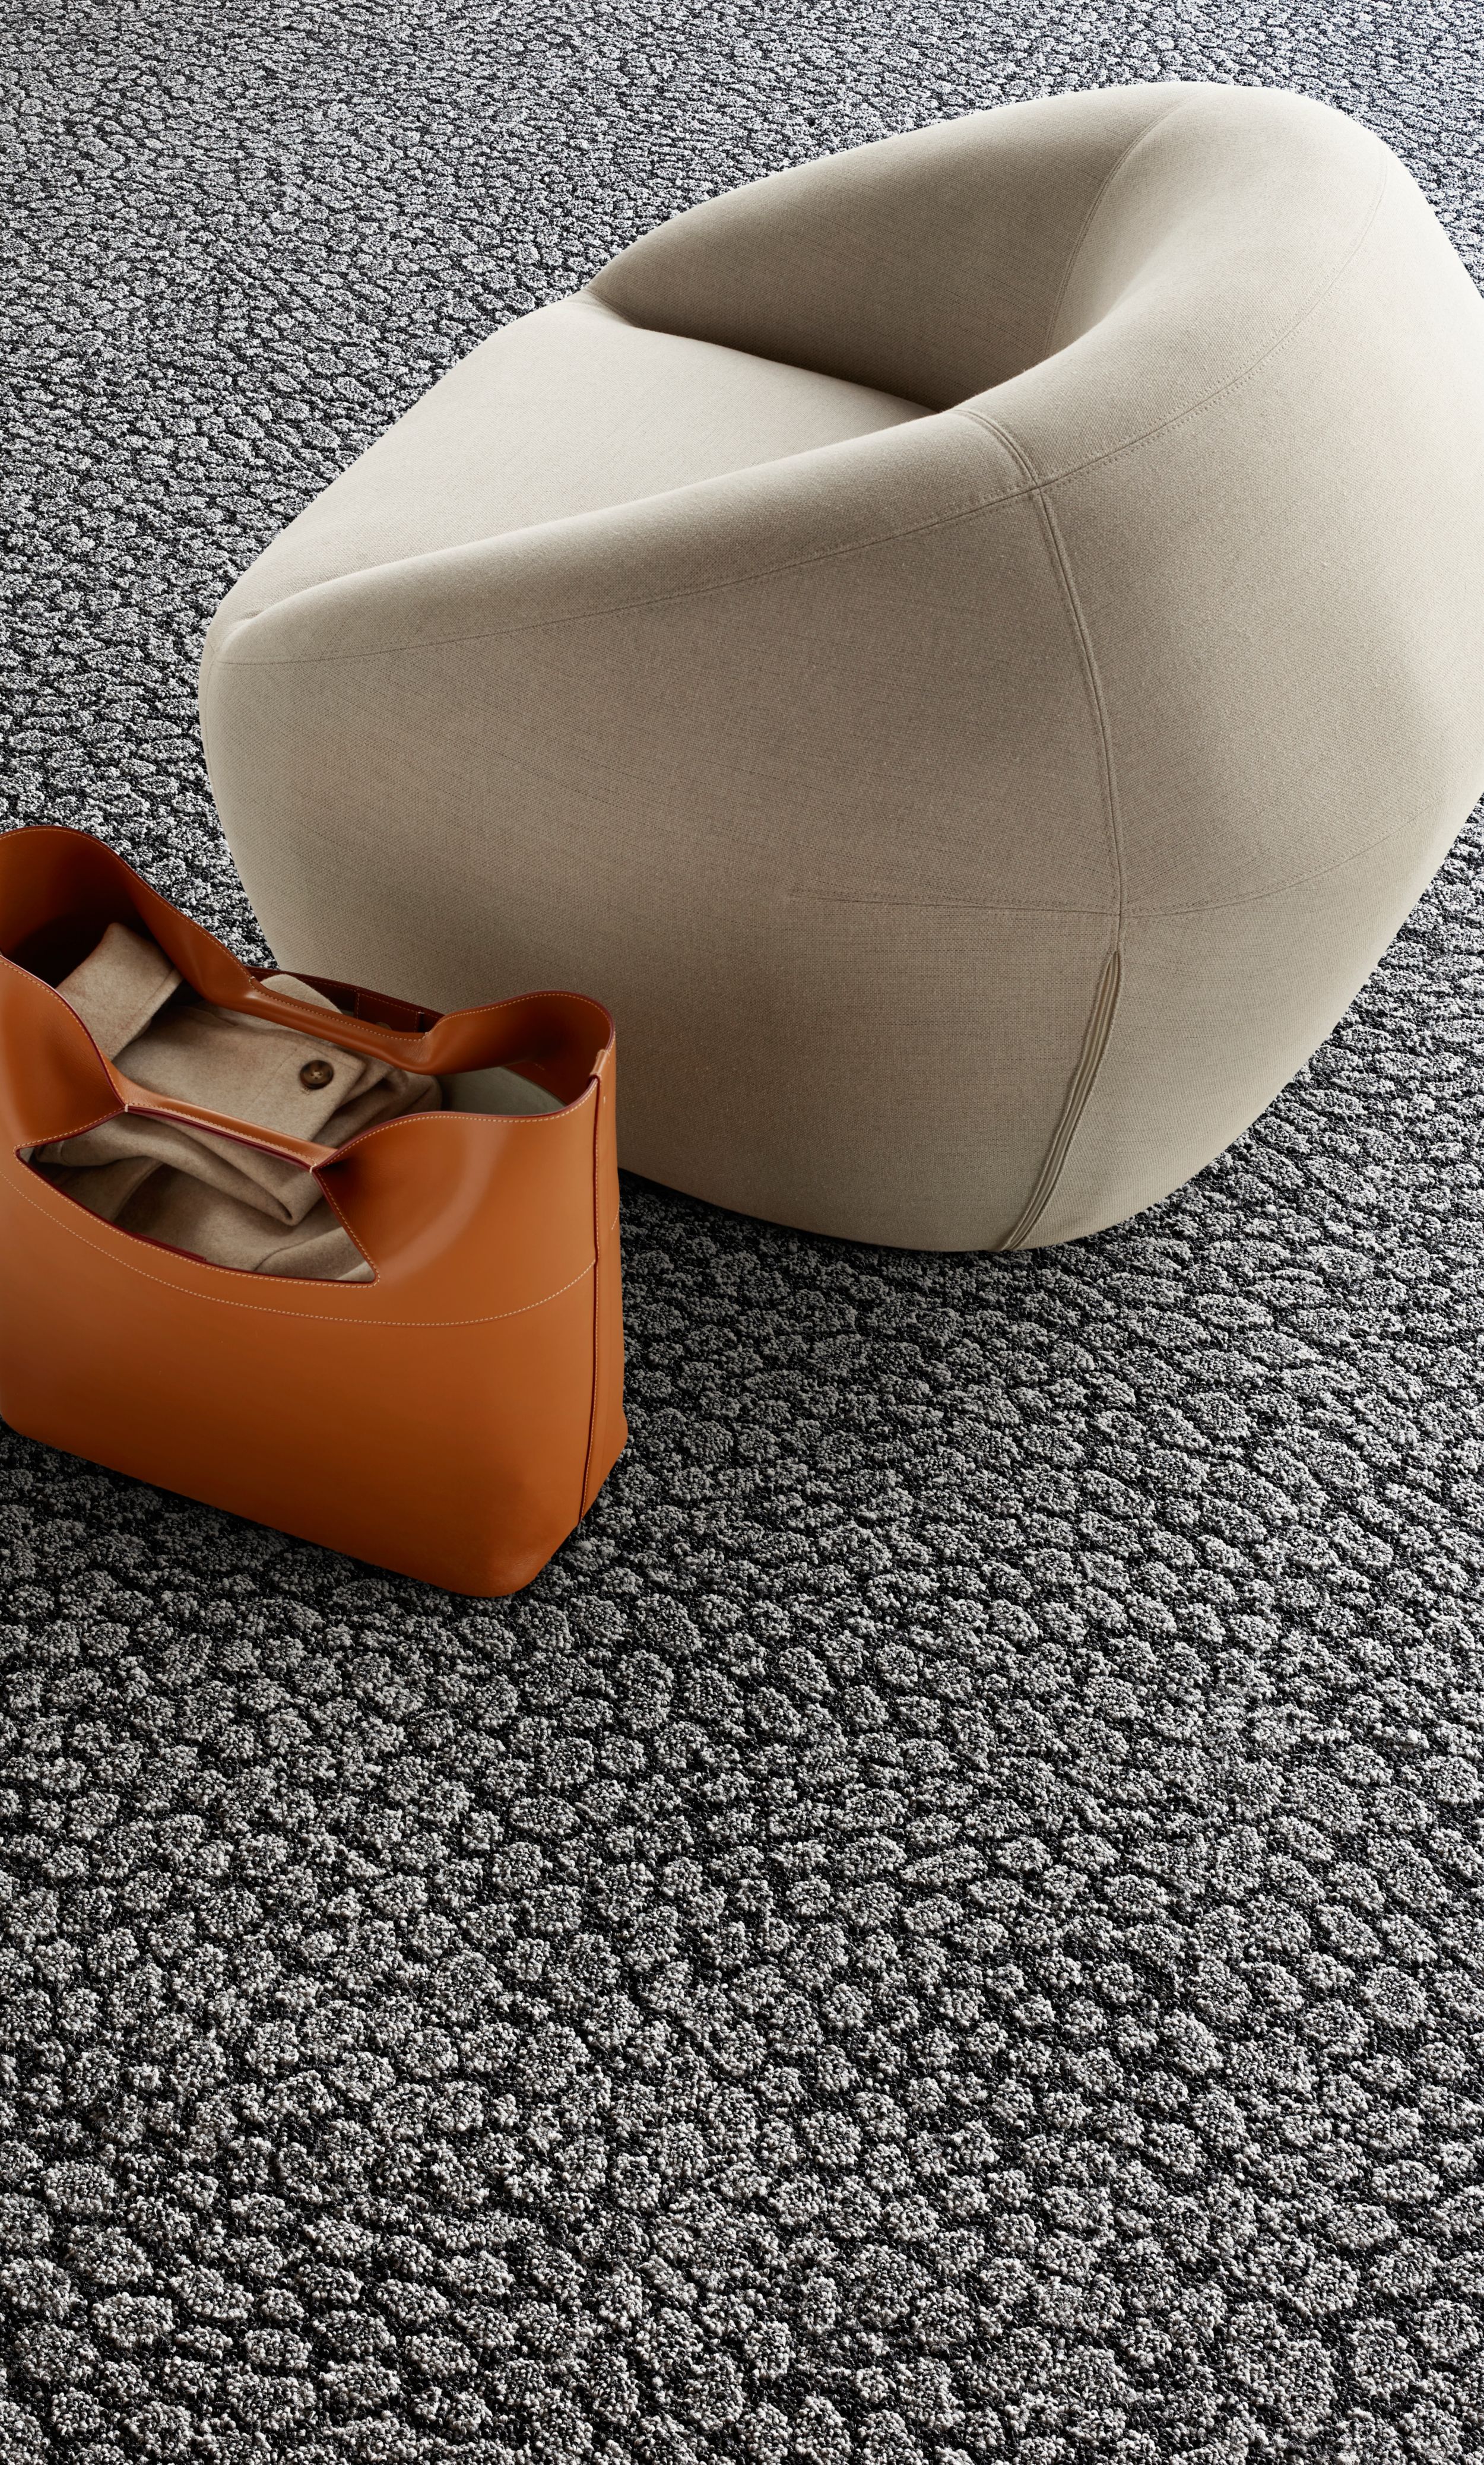 Interface E611 carpet tile detail with low chair and orange tote afbeeldingnummer 2